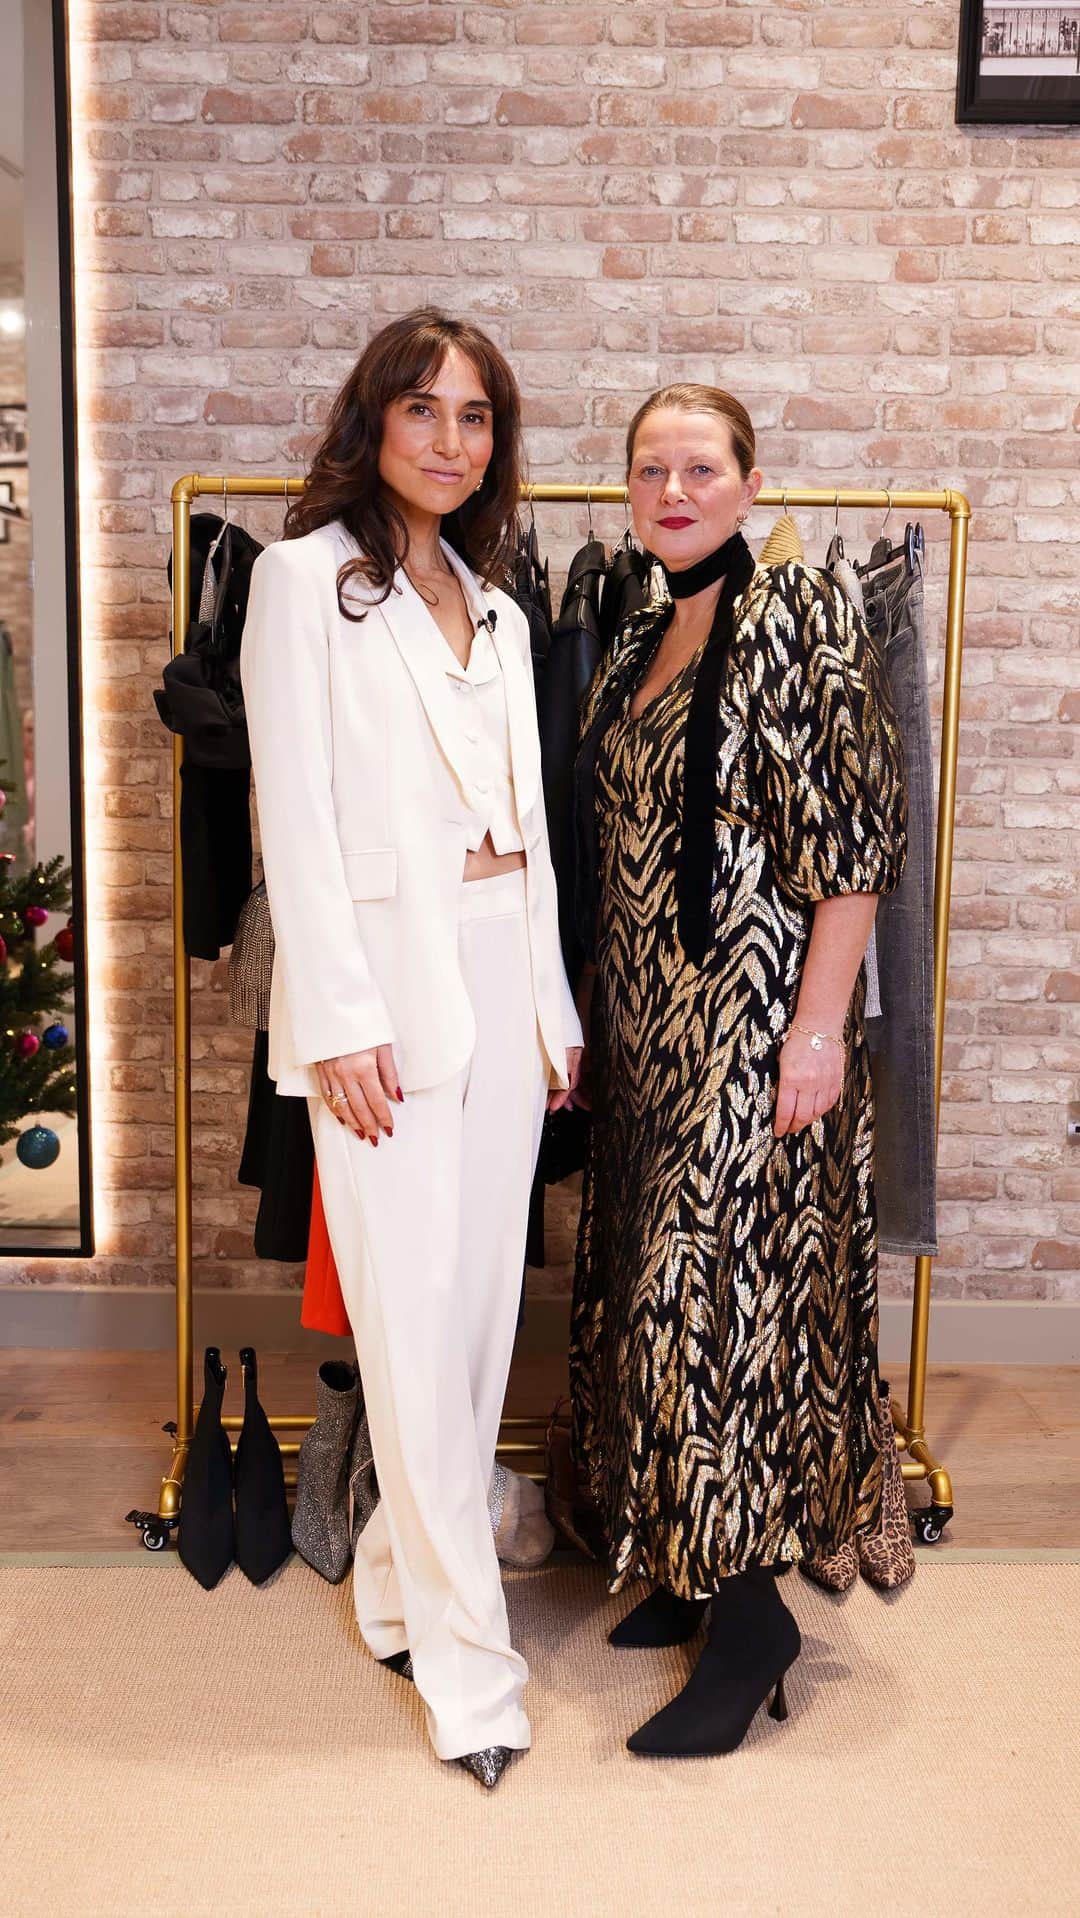 River Islandのインスタグラム：「Your destination for all things fashion is here: Style Talks TV.   Find all our latest Style Talks in one place: recorded just for you.   #ImWearingRI #fashionlover #fashiondesign #autumnlook #Linkinbio to shop  Cream tux blazer - 901496 Cream tux waistcoat - 902657 Cream tux trousers - 902662 Red wide leg trousers - 904381 Black diamante cuff dress - 902806 Black metallic dress - 901437 Cream faux fur coat - 901720 Cream embellished cardigan - 902011」